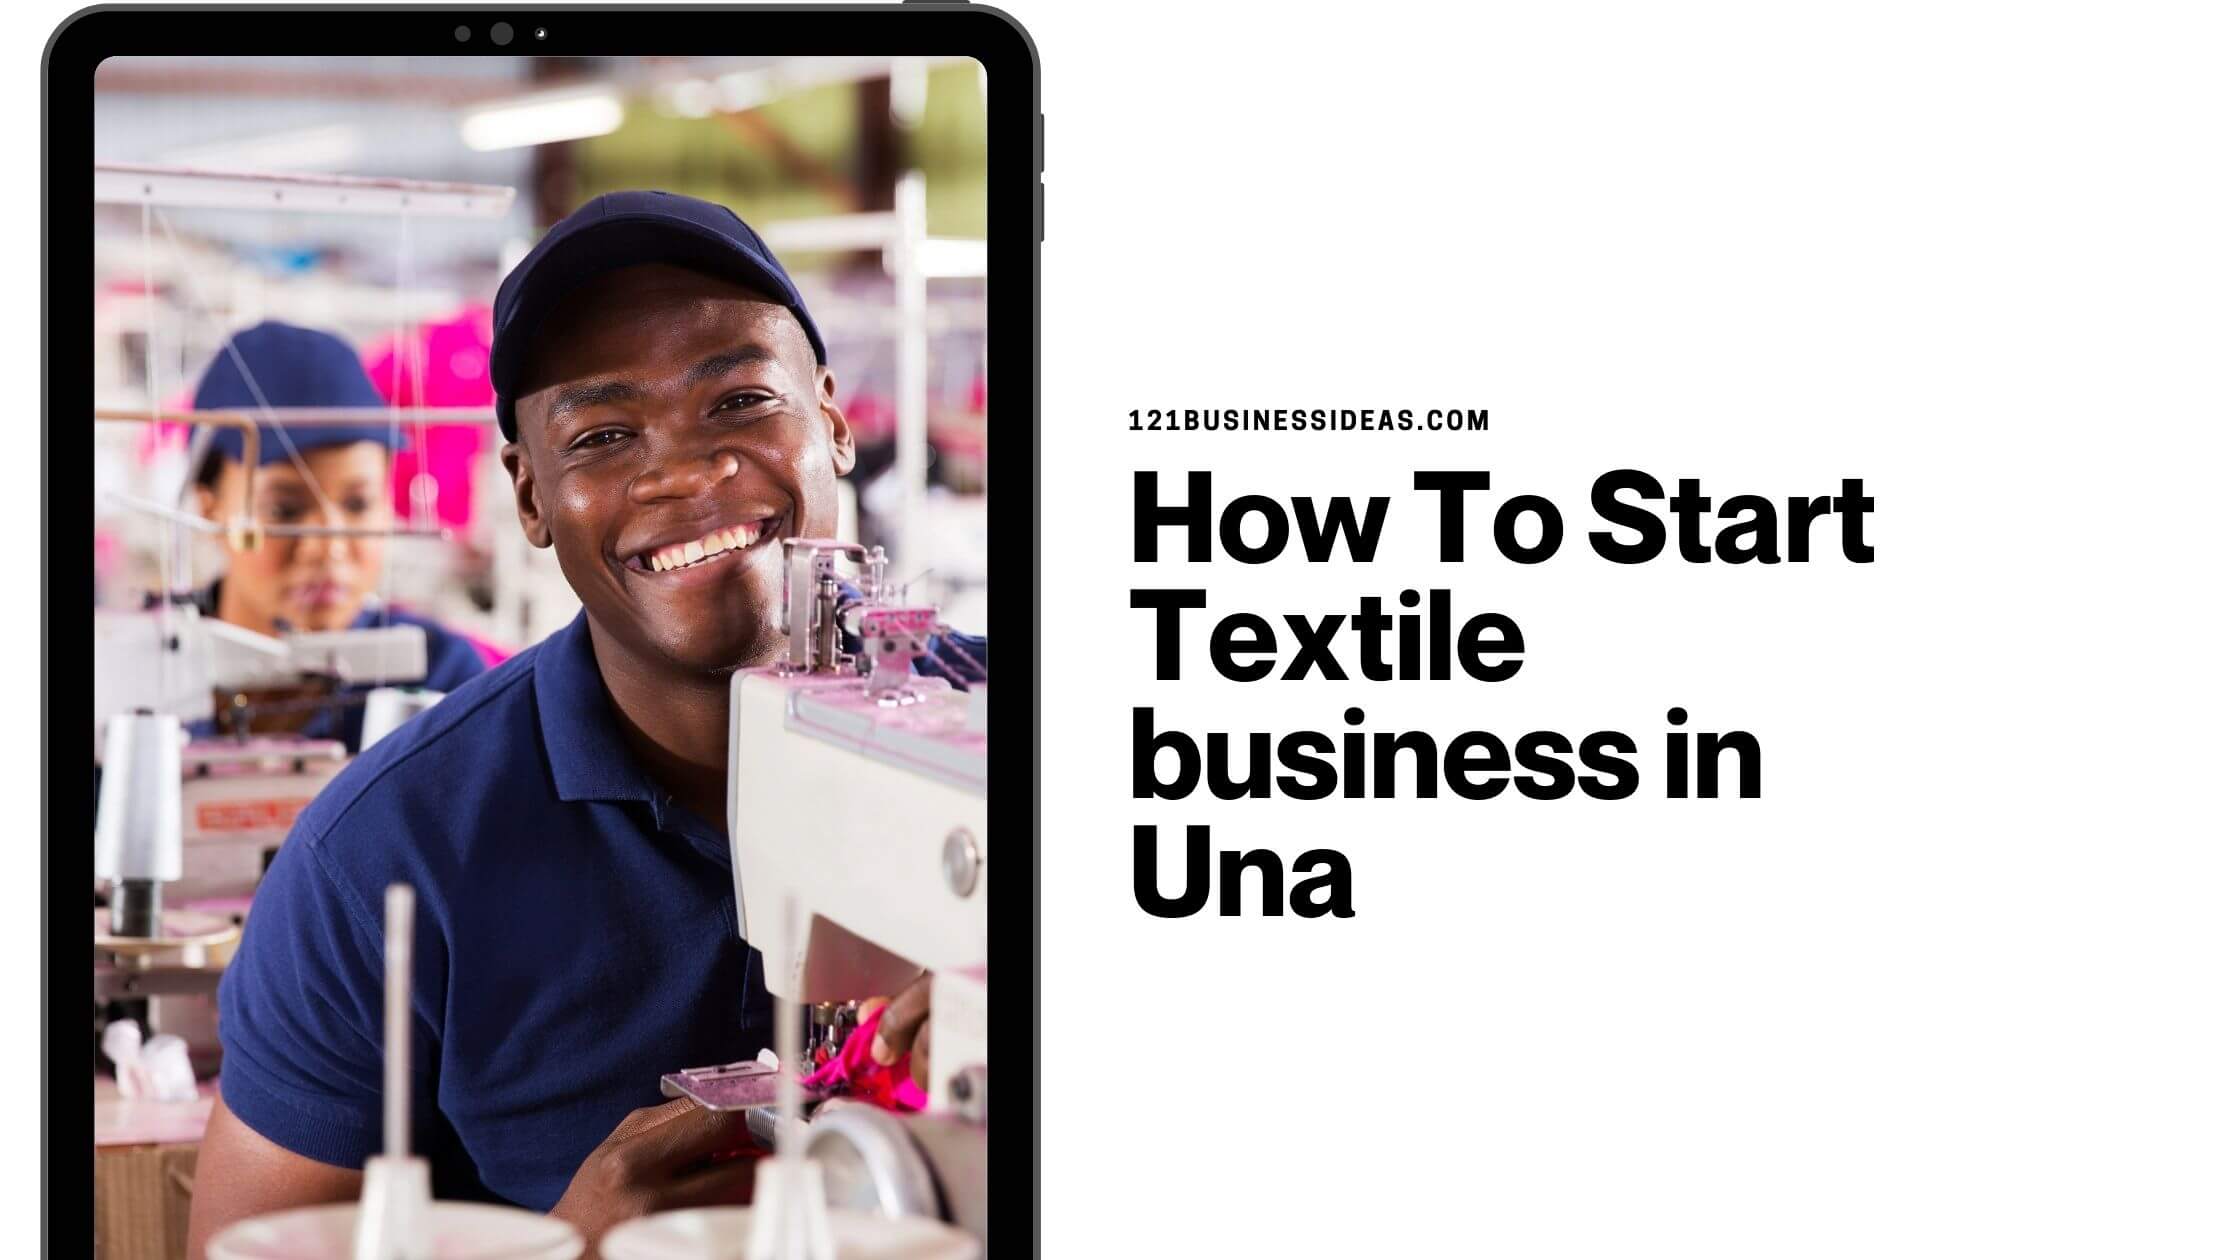 How To Start Textile business in Una (1)